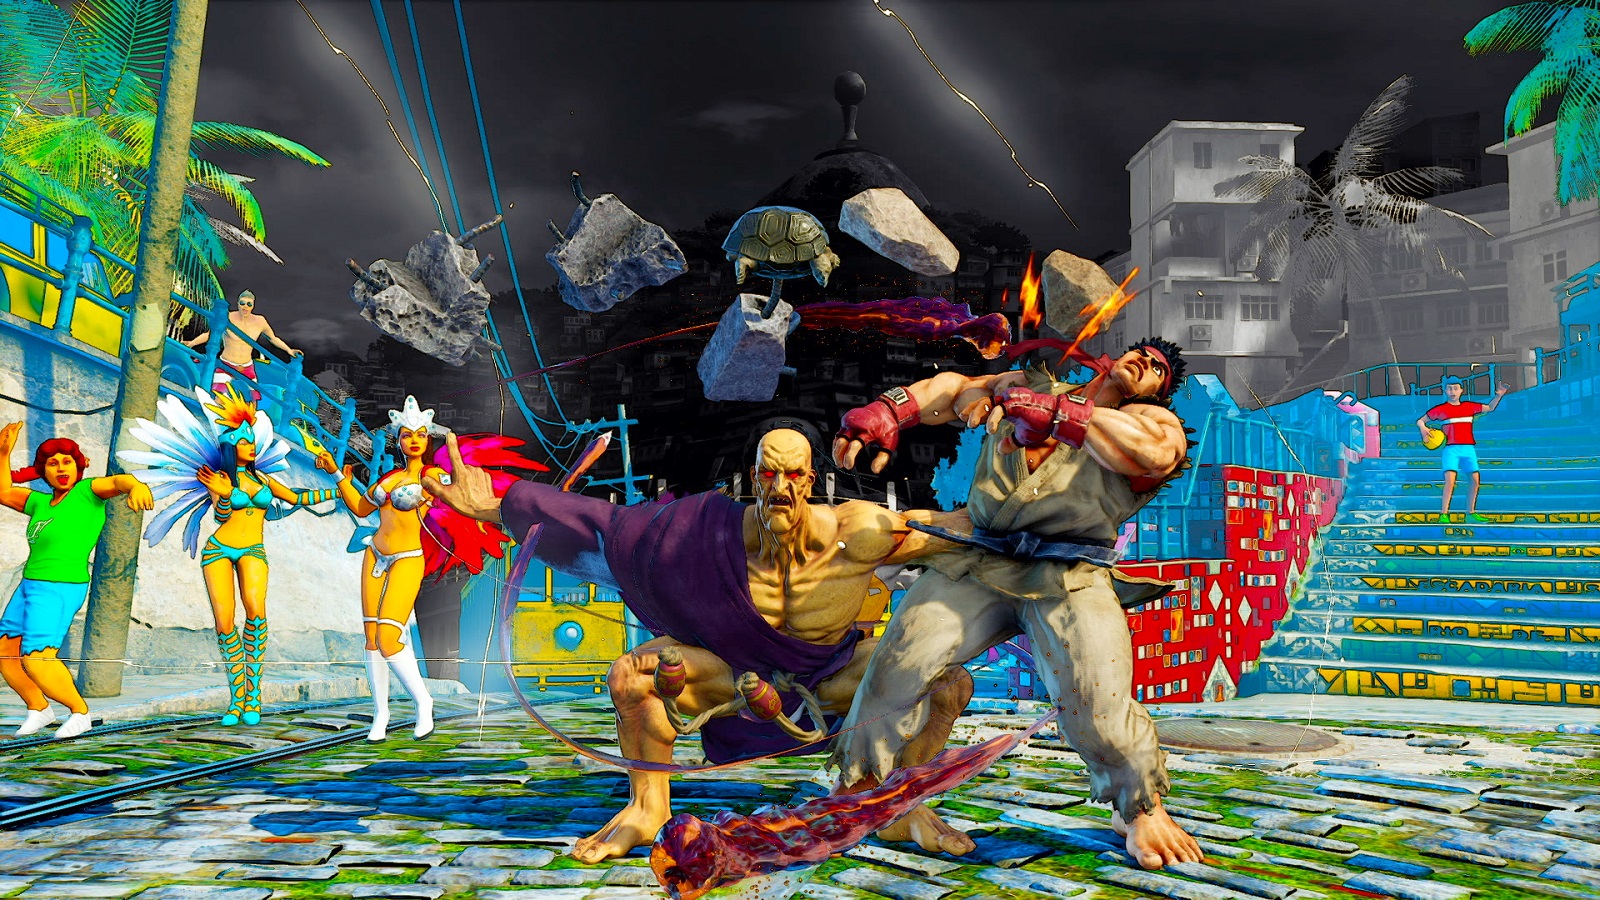 Street Fighter V: Champion Edition DLC characters Oro and Akira